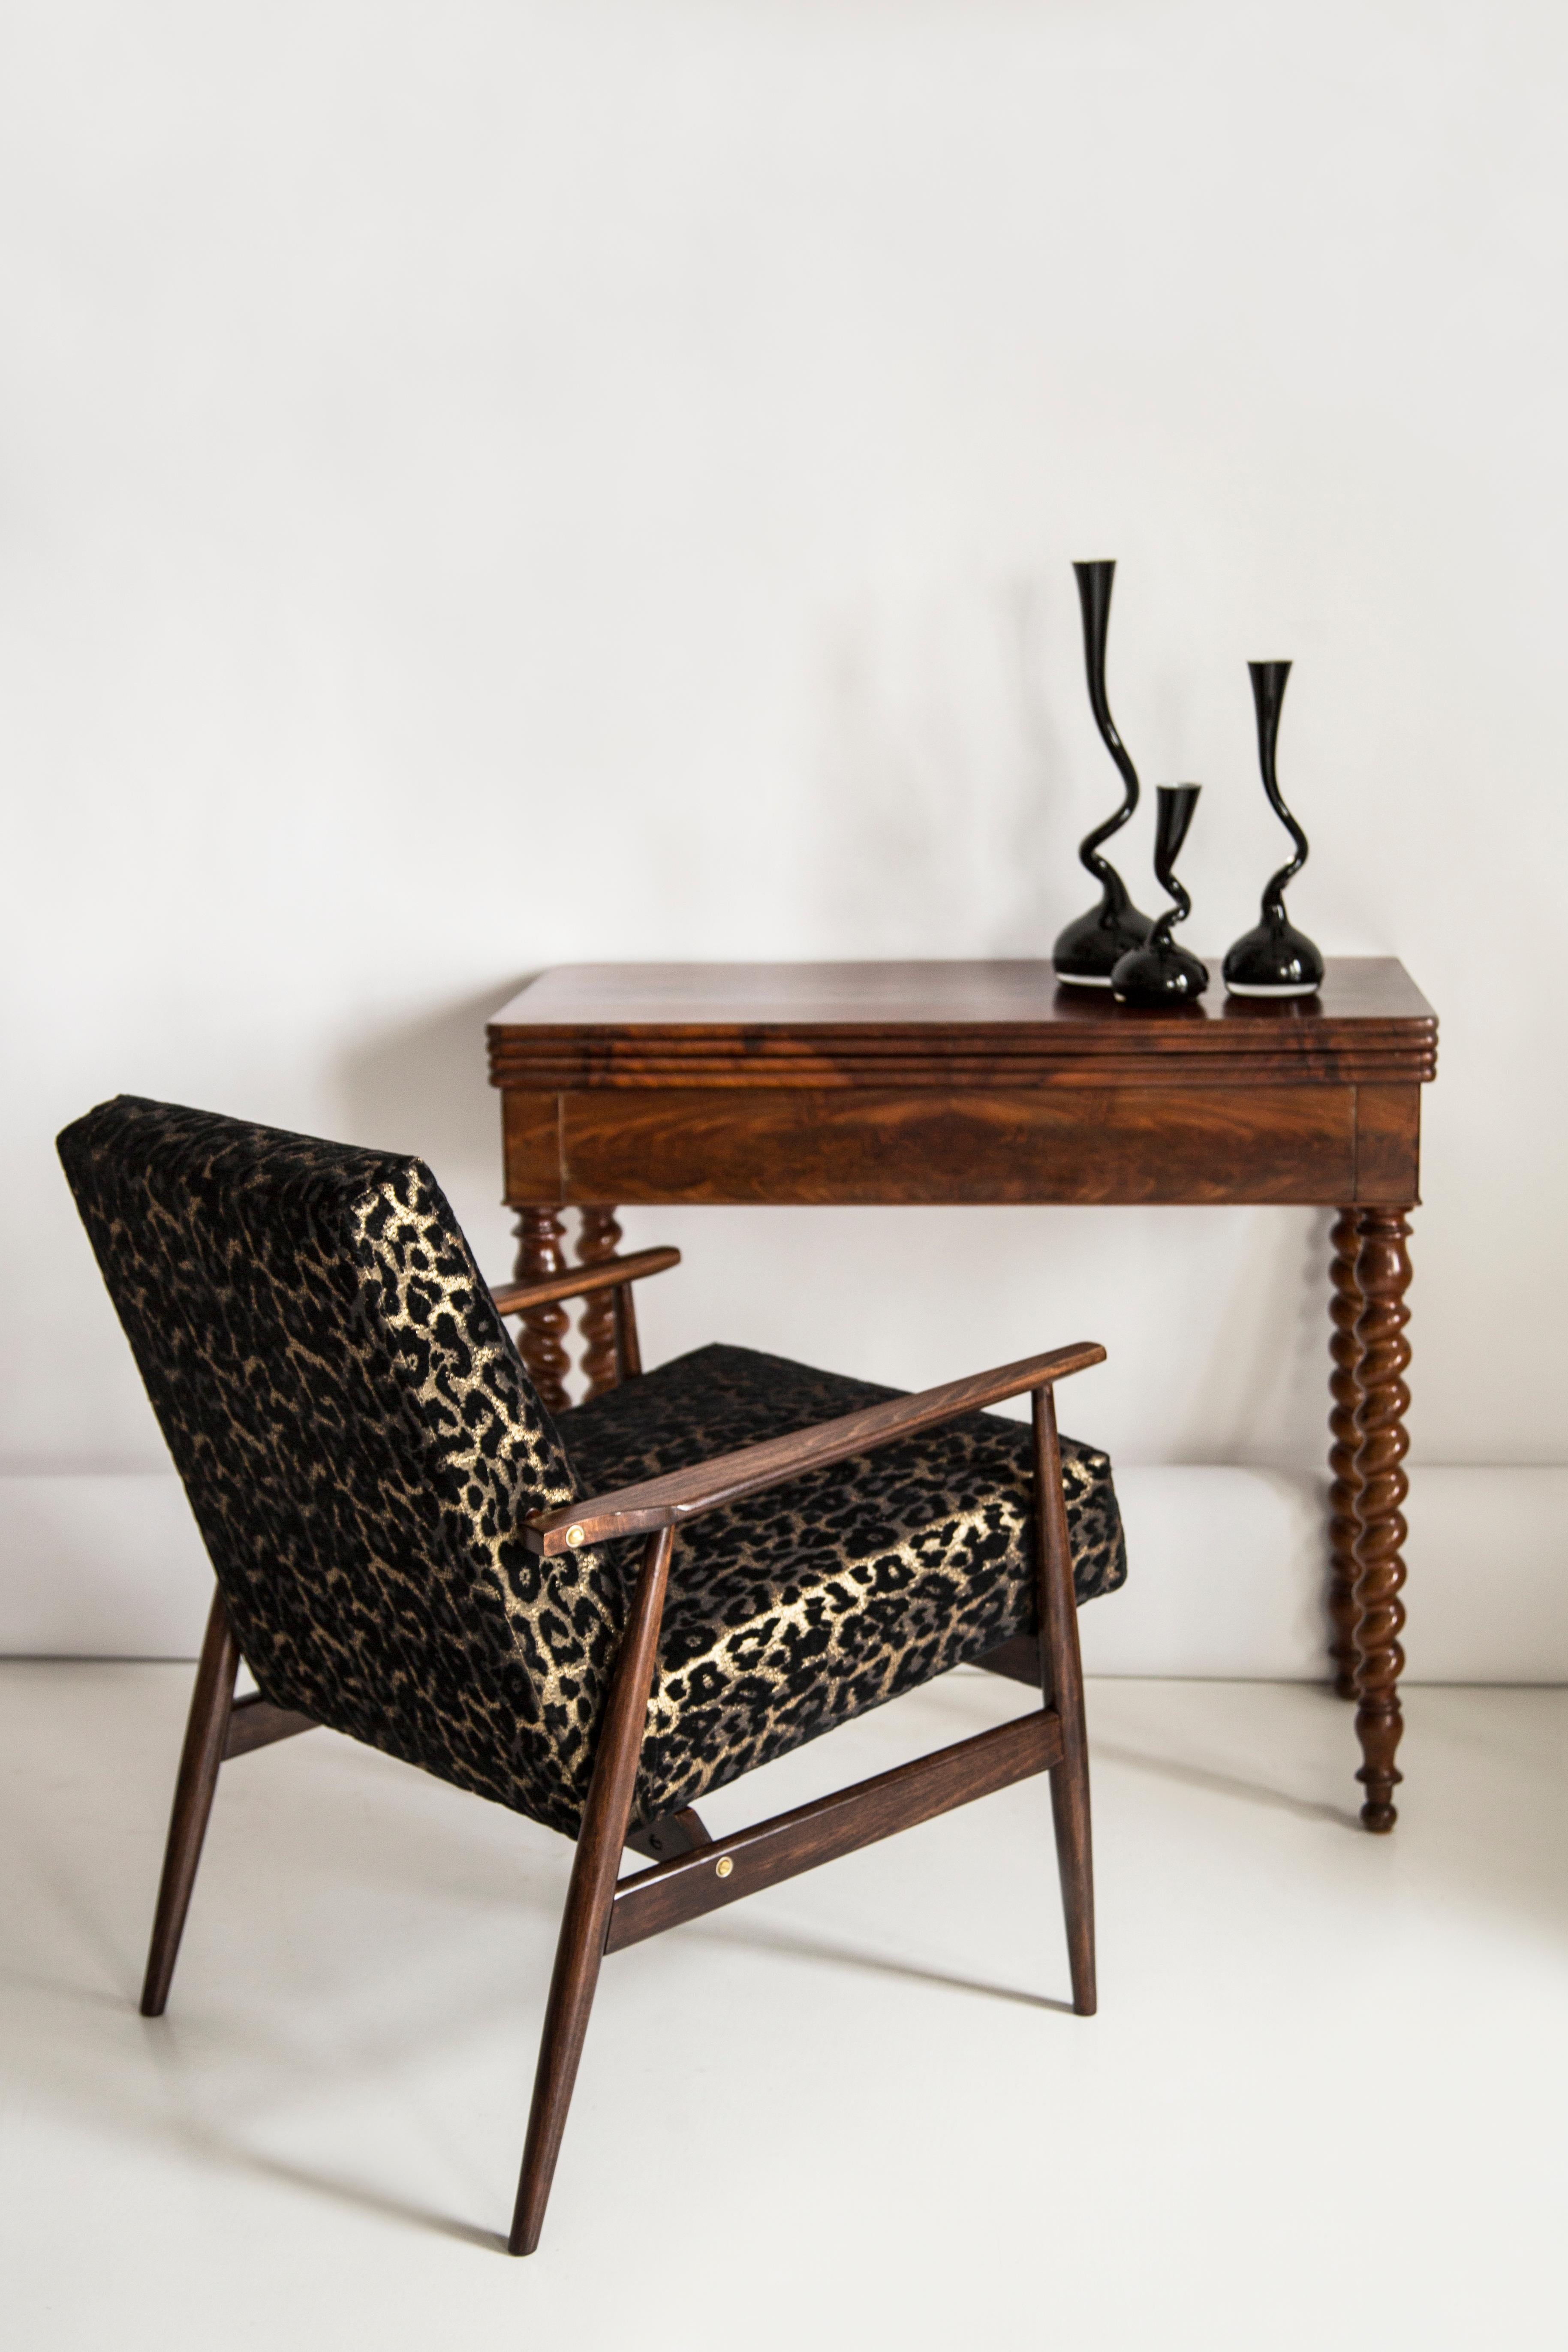 A beautiful, restored armchairs designed by Henryk Lis. Furniture after full carpentry and upholstery renovation. The fabric, which is covered with a backrest and a seat, is a high-quality Italian velvet upholstery printed in leopard pattern. The